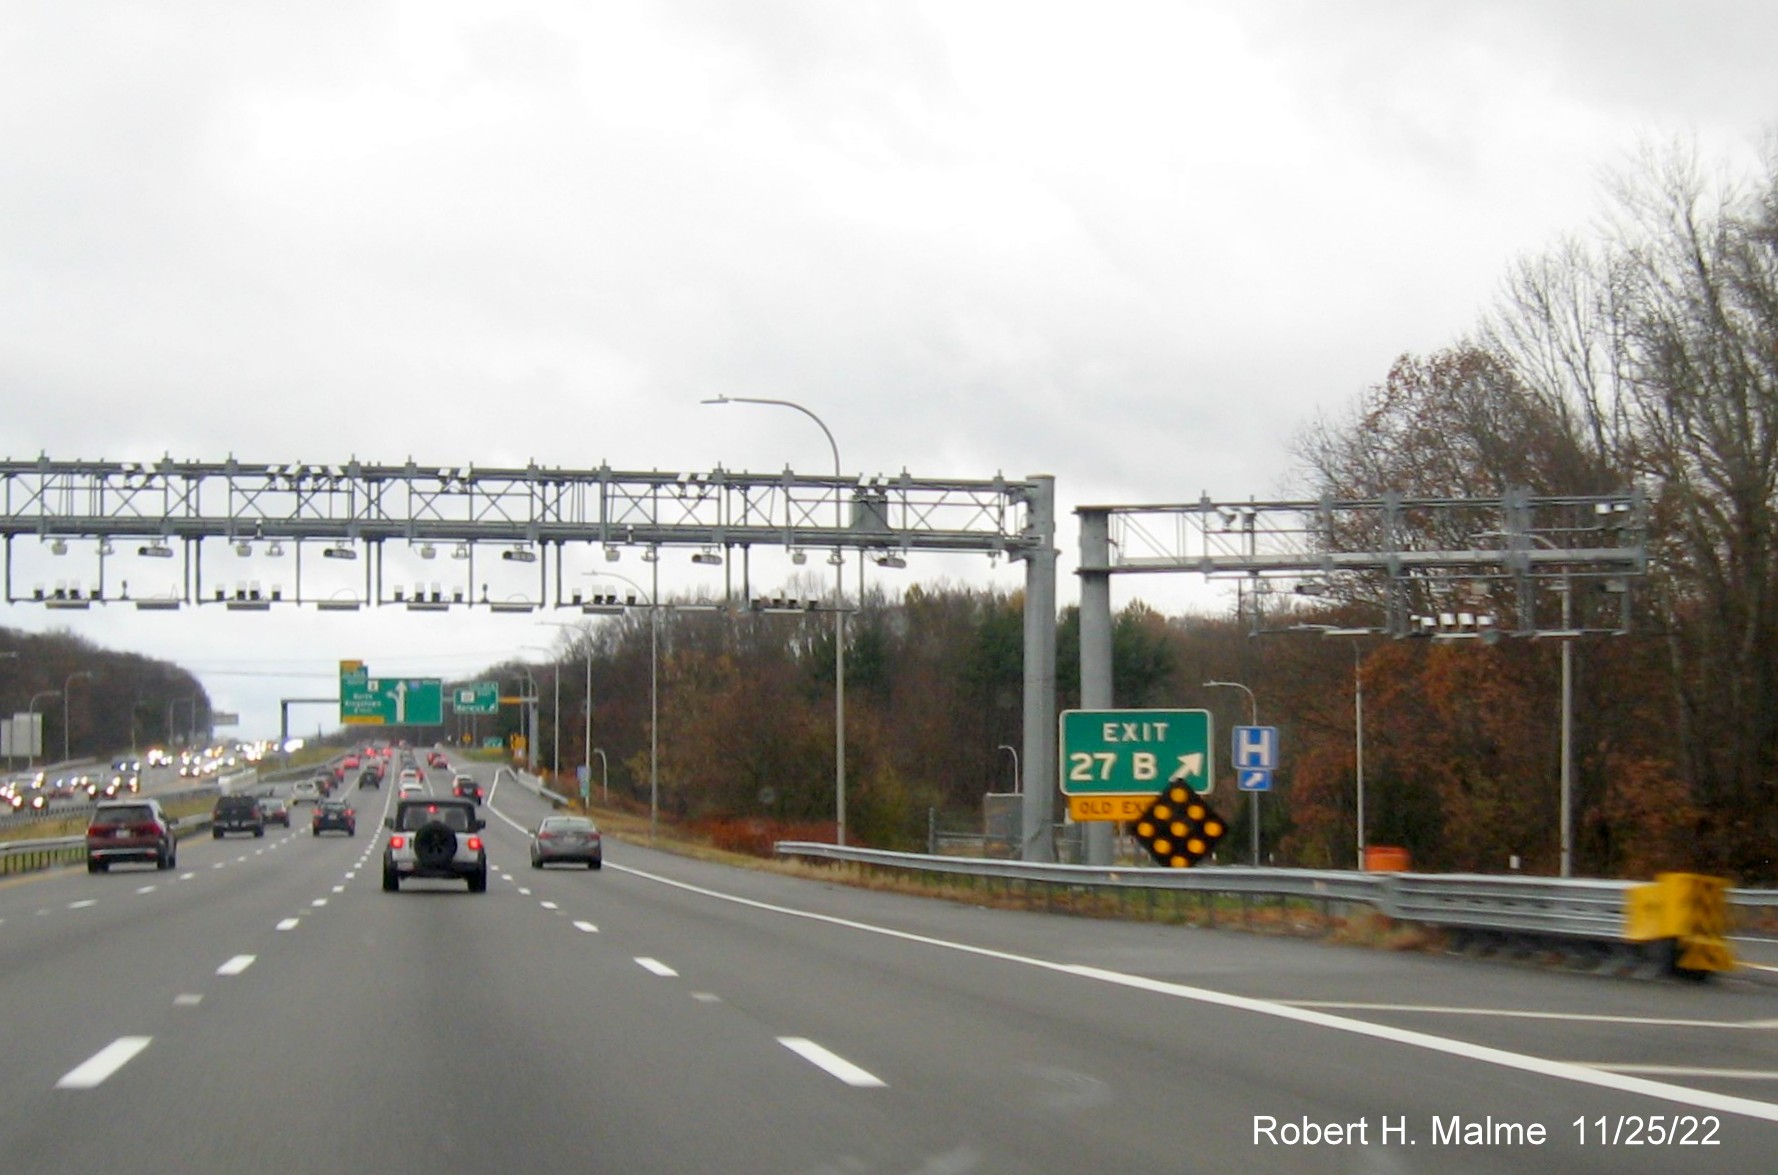 Image of gore sign for RI 117 West exit with new milepost based exit numbers and yellow Old Exit 10B sign below on I-95 South in Warwick, November 2022